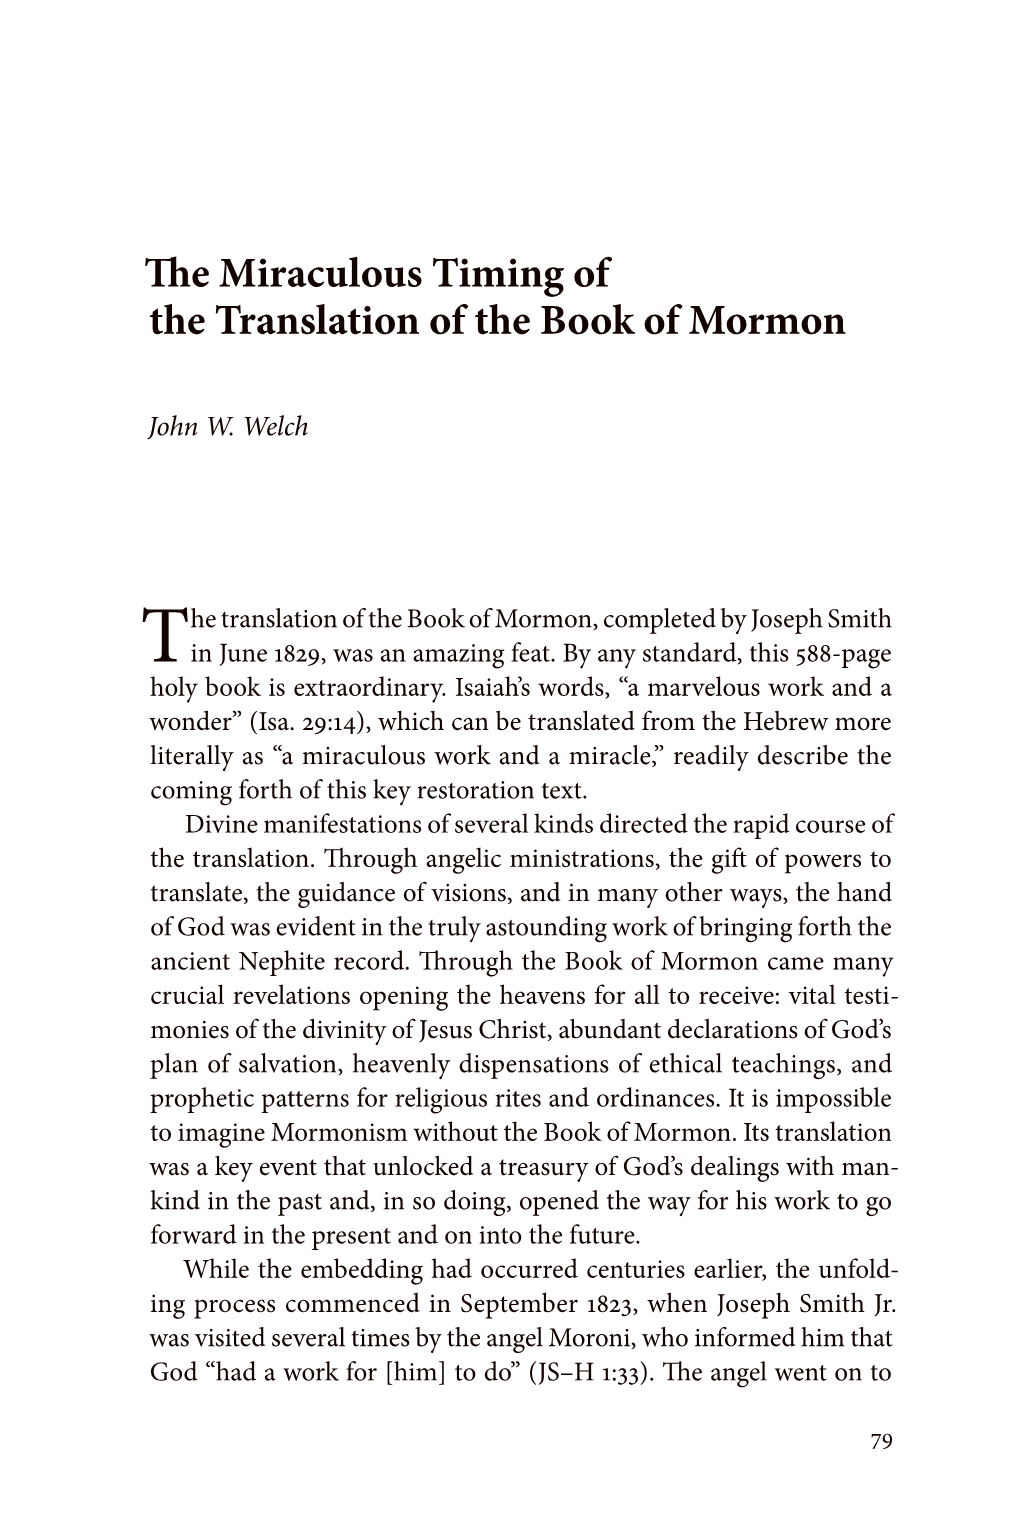 The Miraculous Timing of the Translation of the Book of Mormon